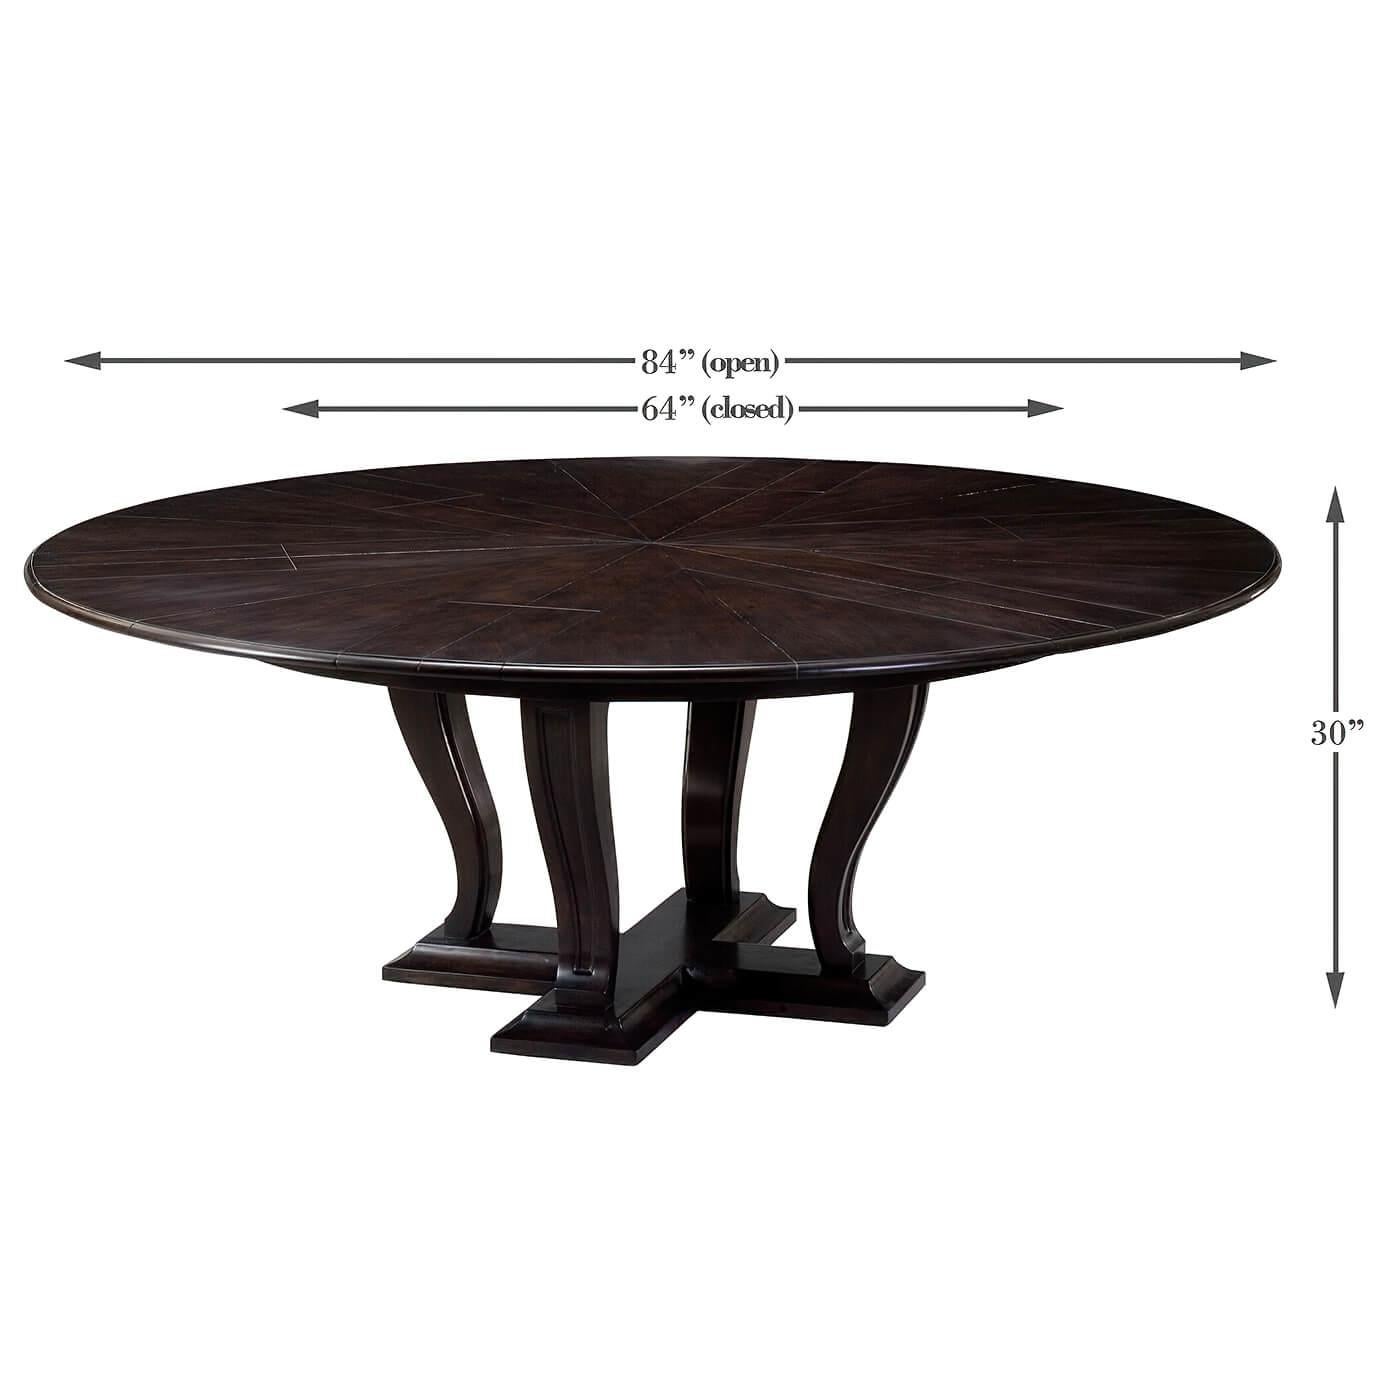 Wood Art Deco Style Round Dining Table For Sale